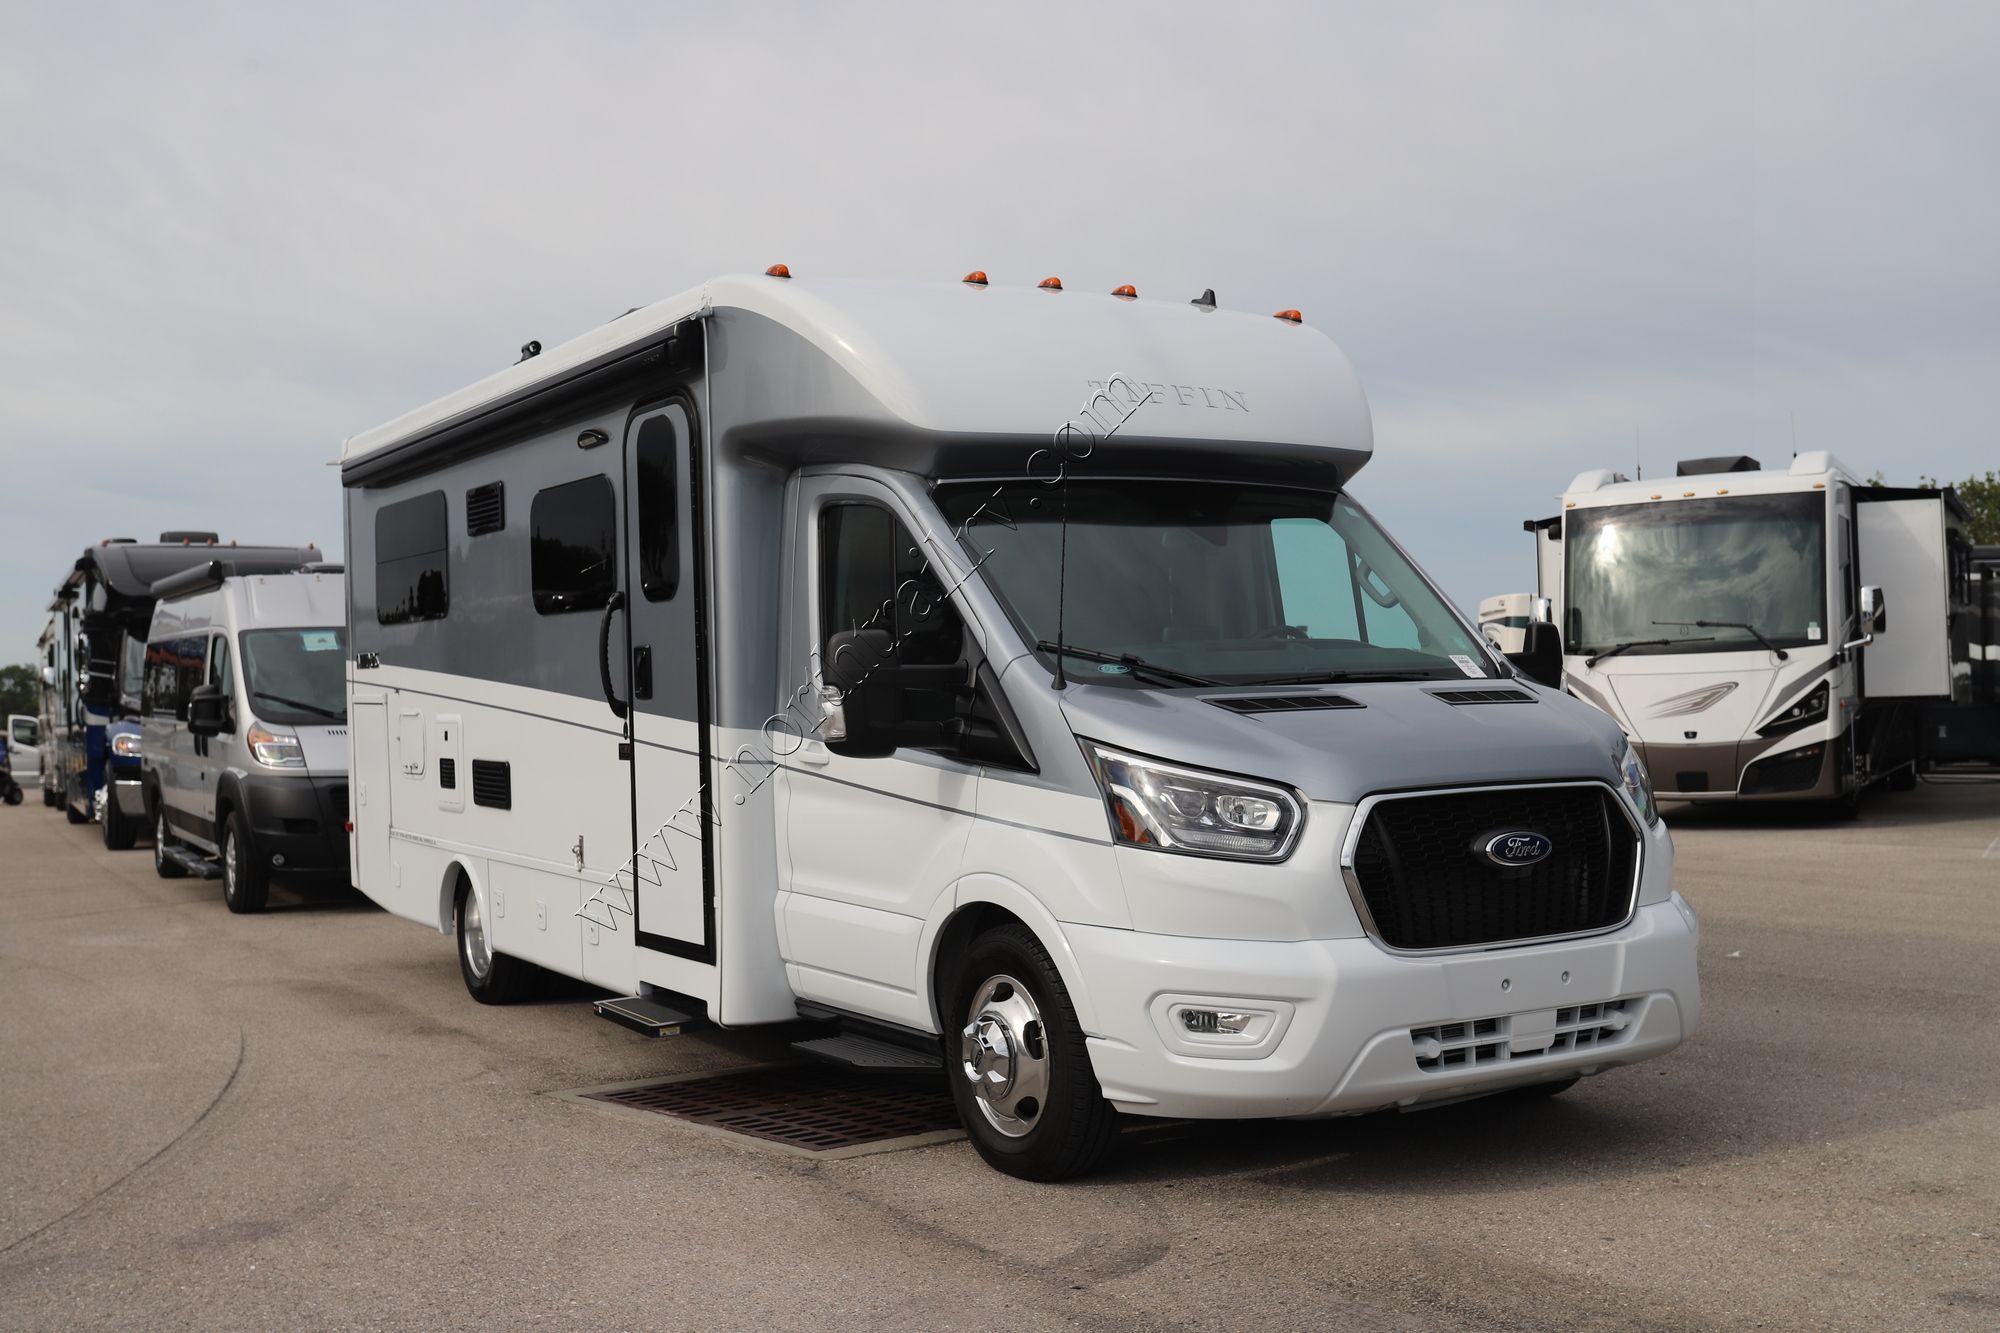 Used 2022 Tiffin Motor Homes Midas 24RT Class C  For Sale